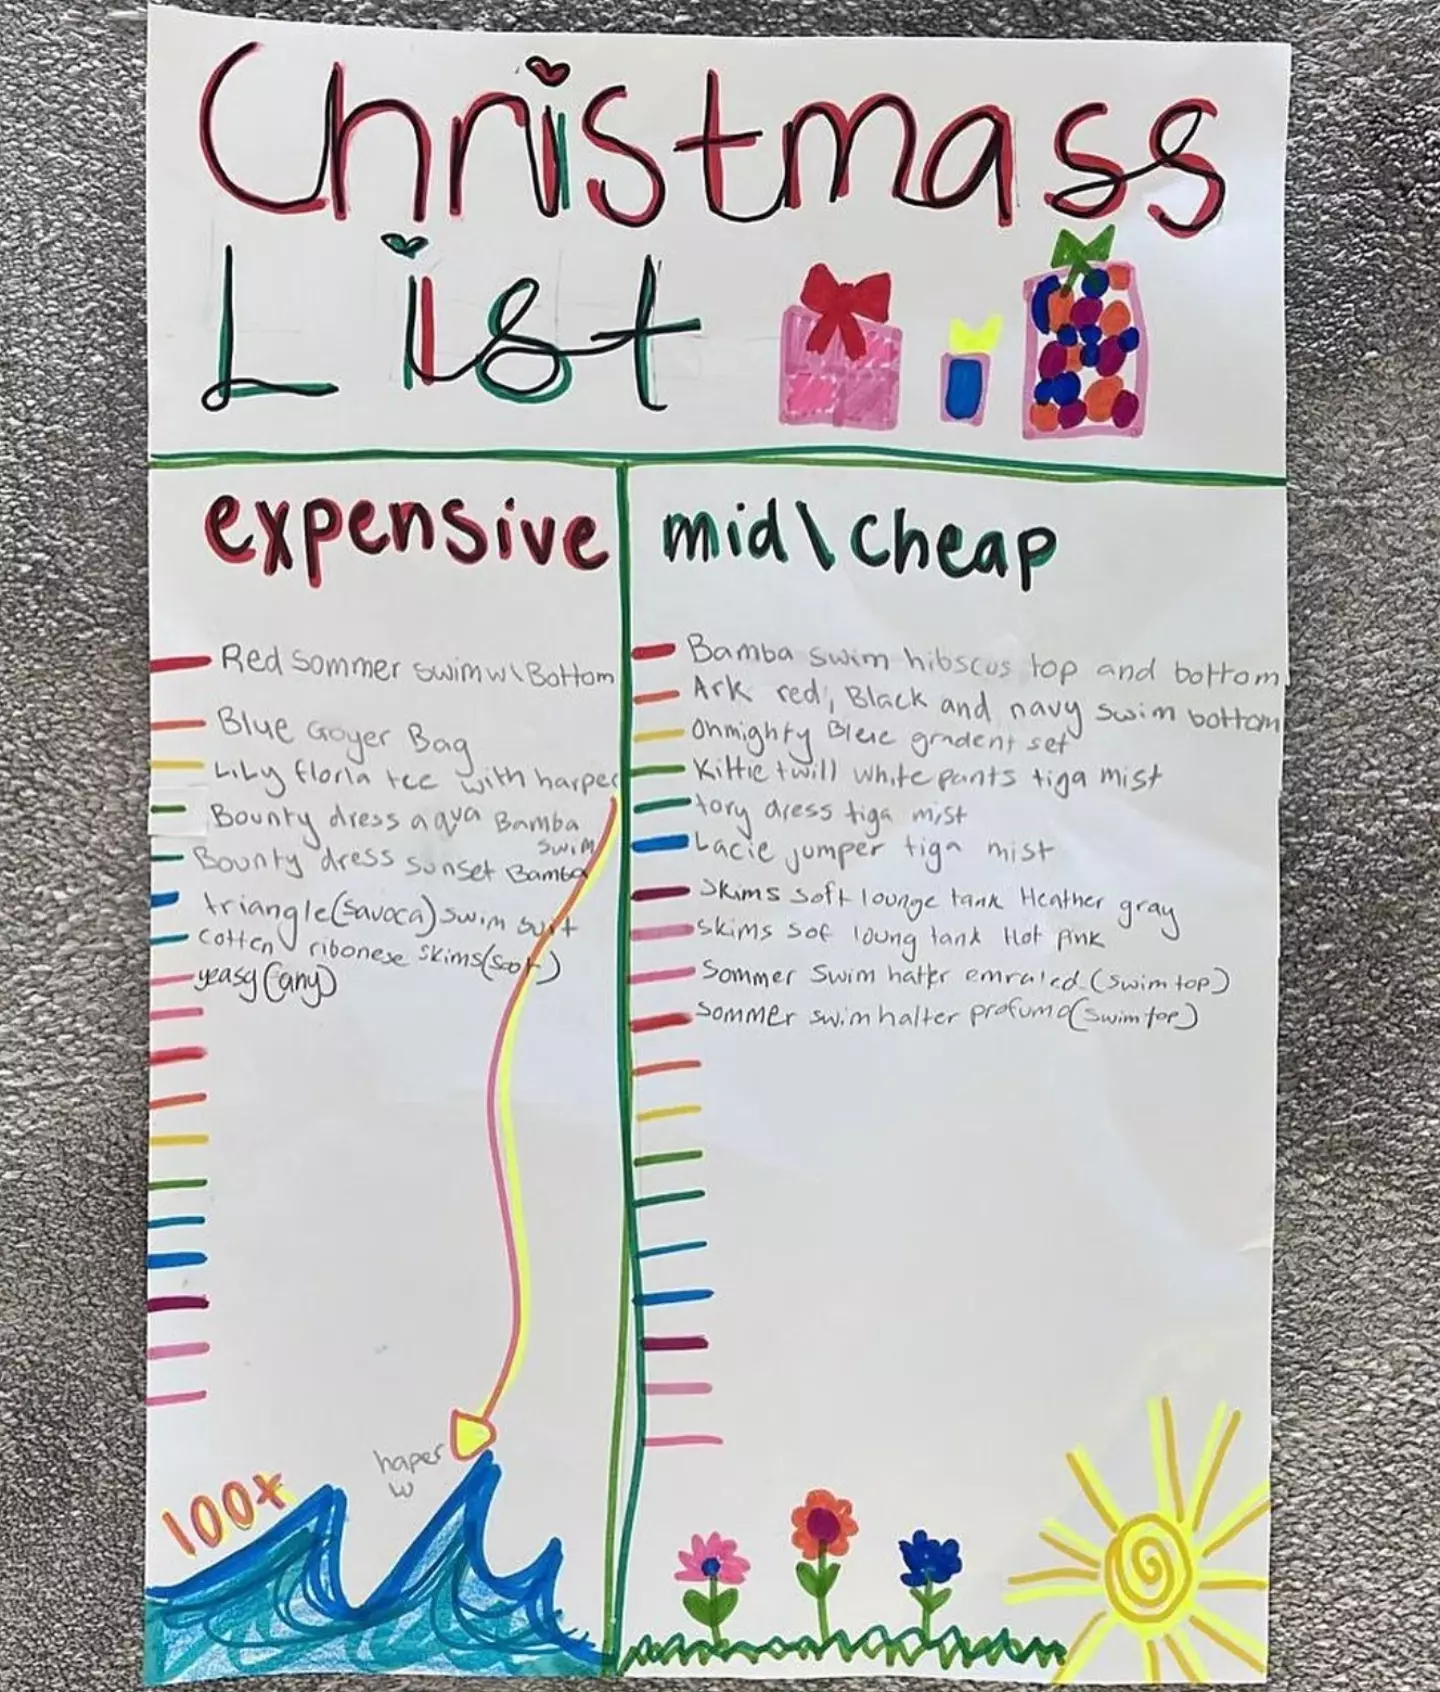 Roxy posted her daughter's Christmas present list.